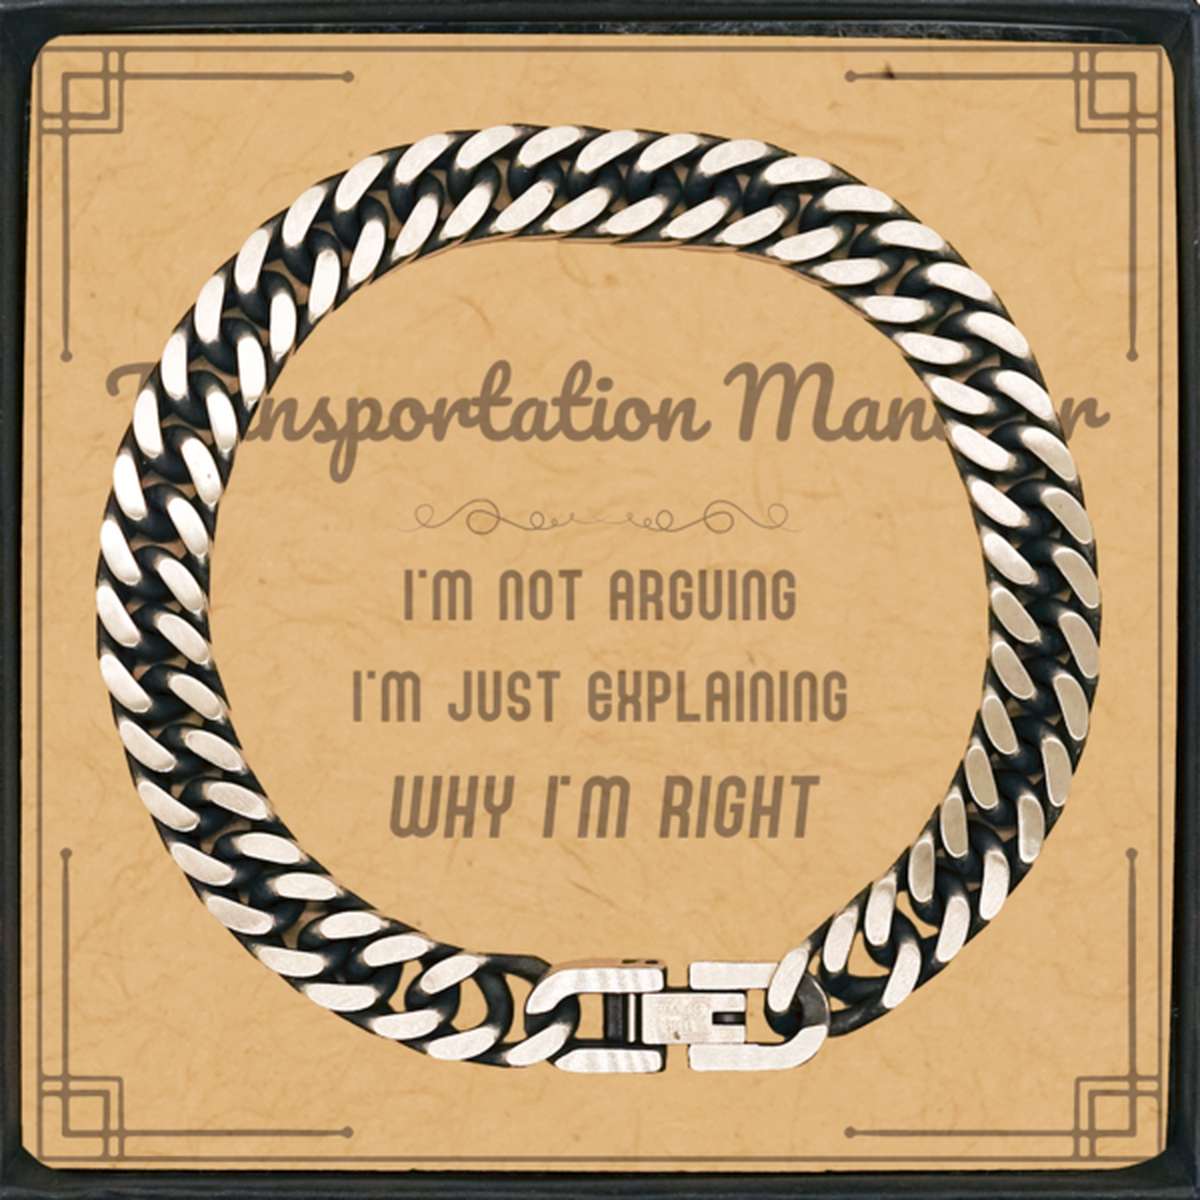 Transportation Manager I'm not Arguing. I'm Just Explaining Why I'm RIGHT Cuban Link Chain Bracelet, Funny Saying Quote Transportation Manager Gifts For Transportation Manager Message Card Graduation Birthday Christmas Gifts for Men Women Coworker